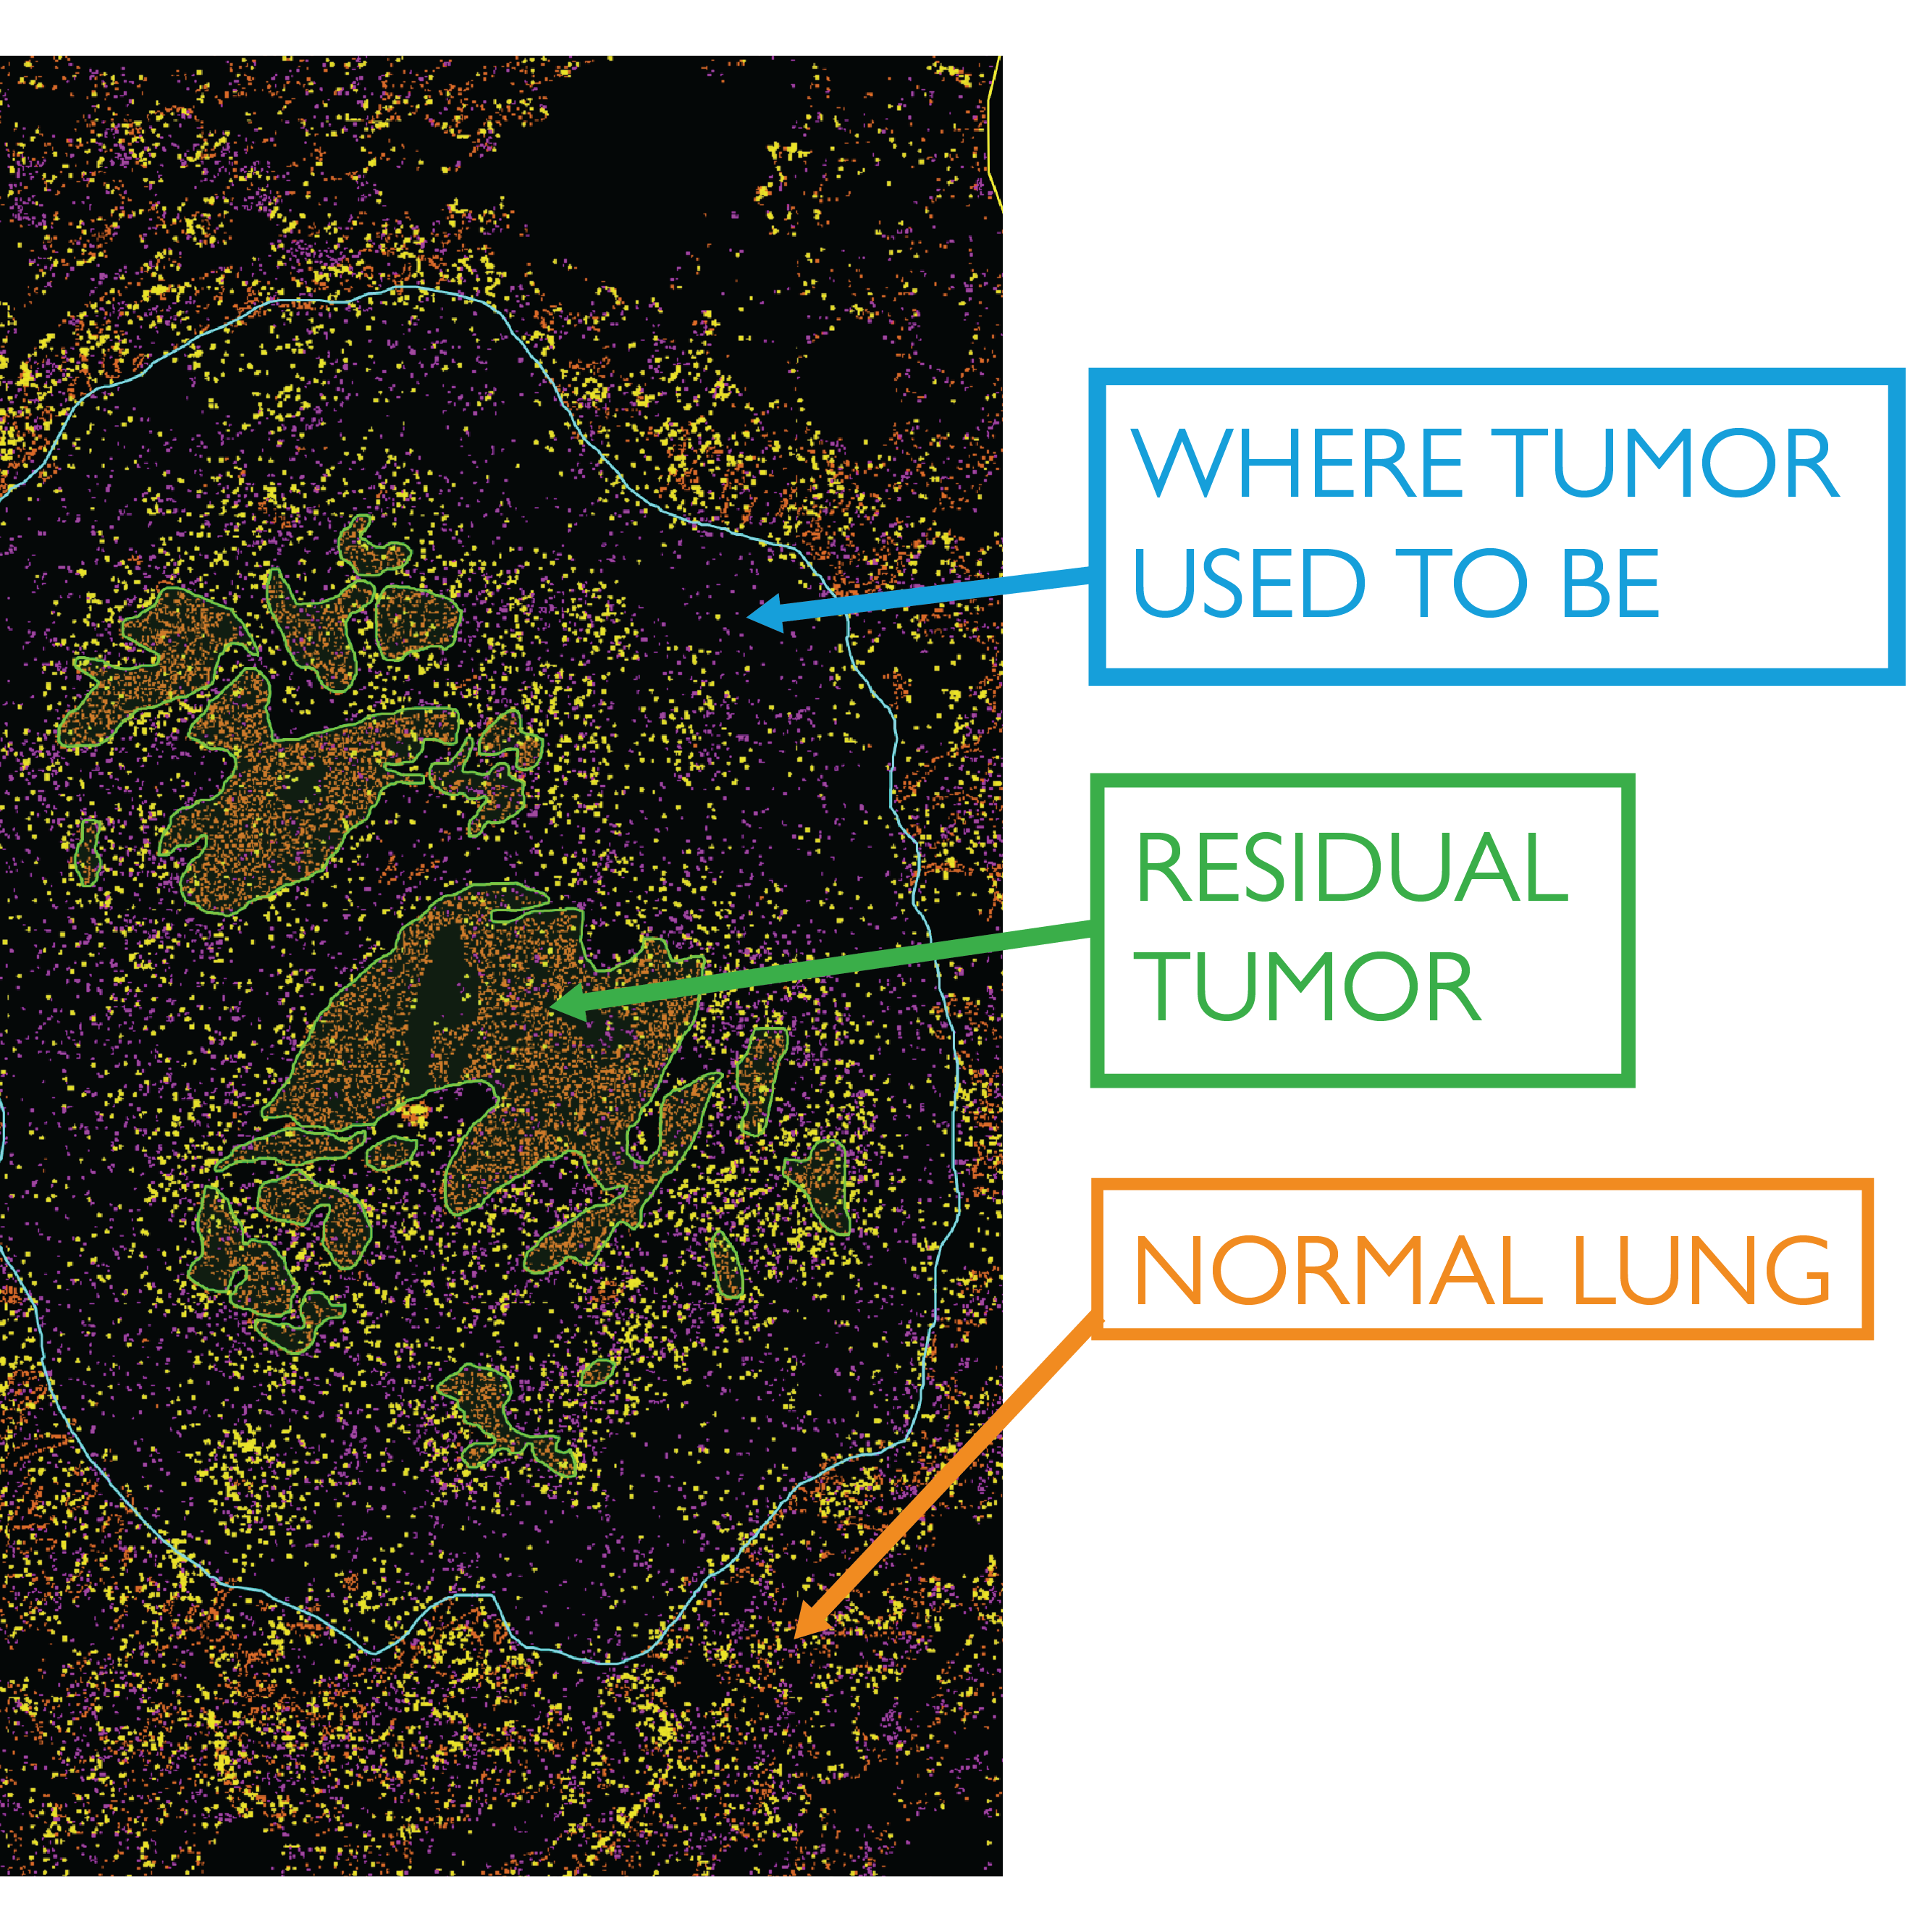 An image from the AstroPath platform shows a 70% reduction in tumor size after neoadjuvant therapy prior to surgery.